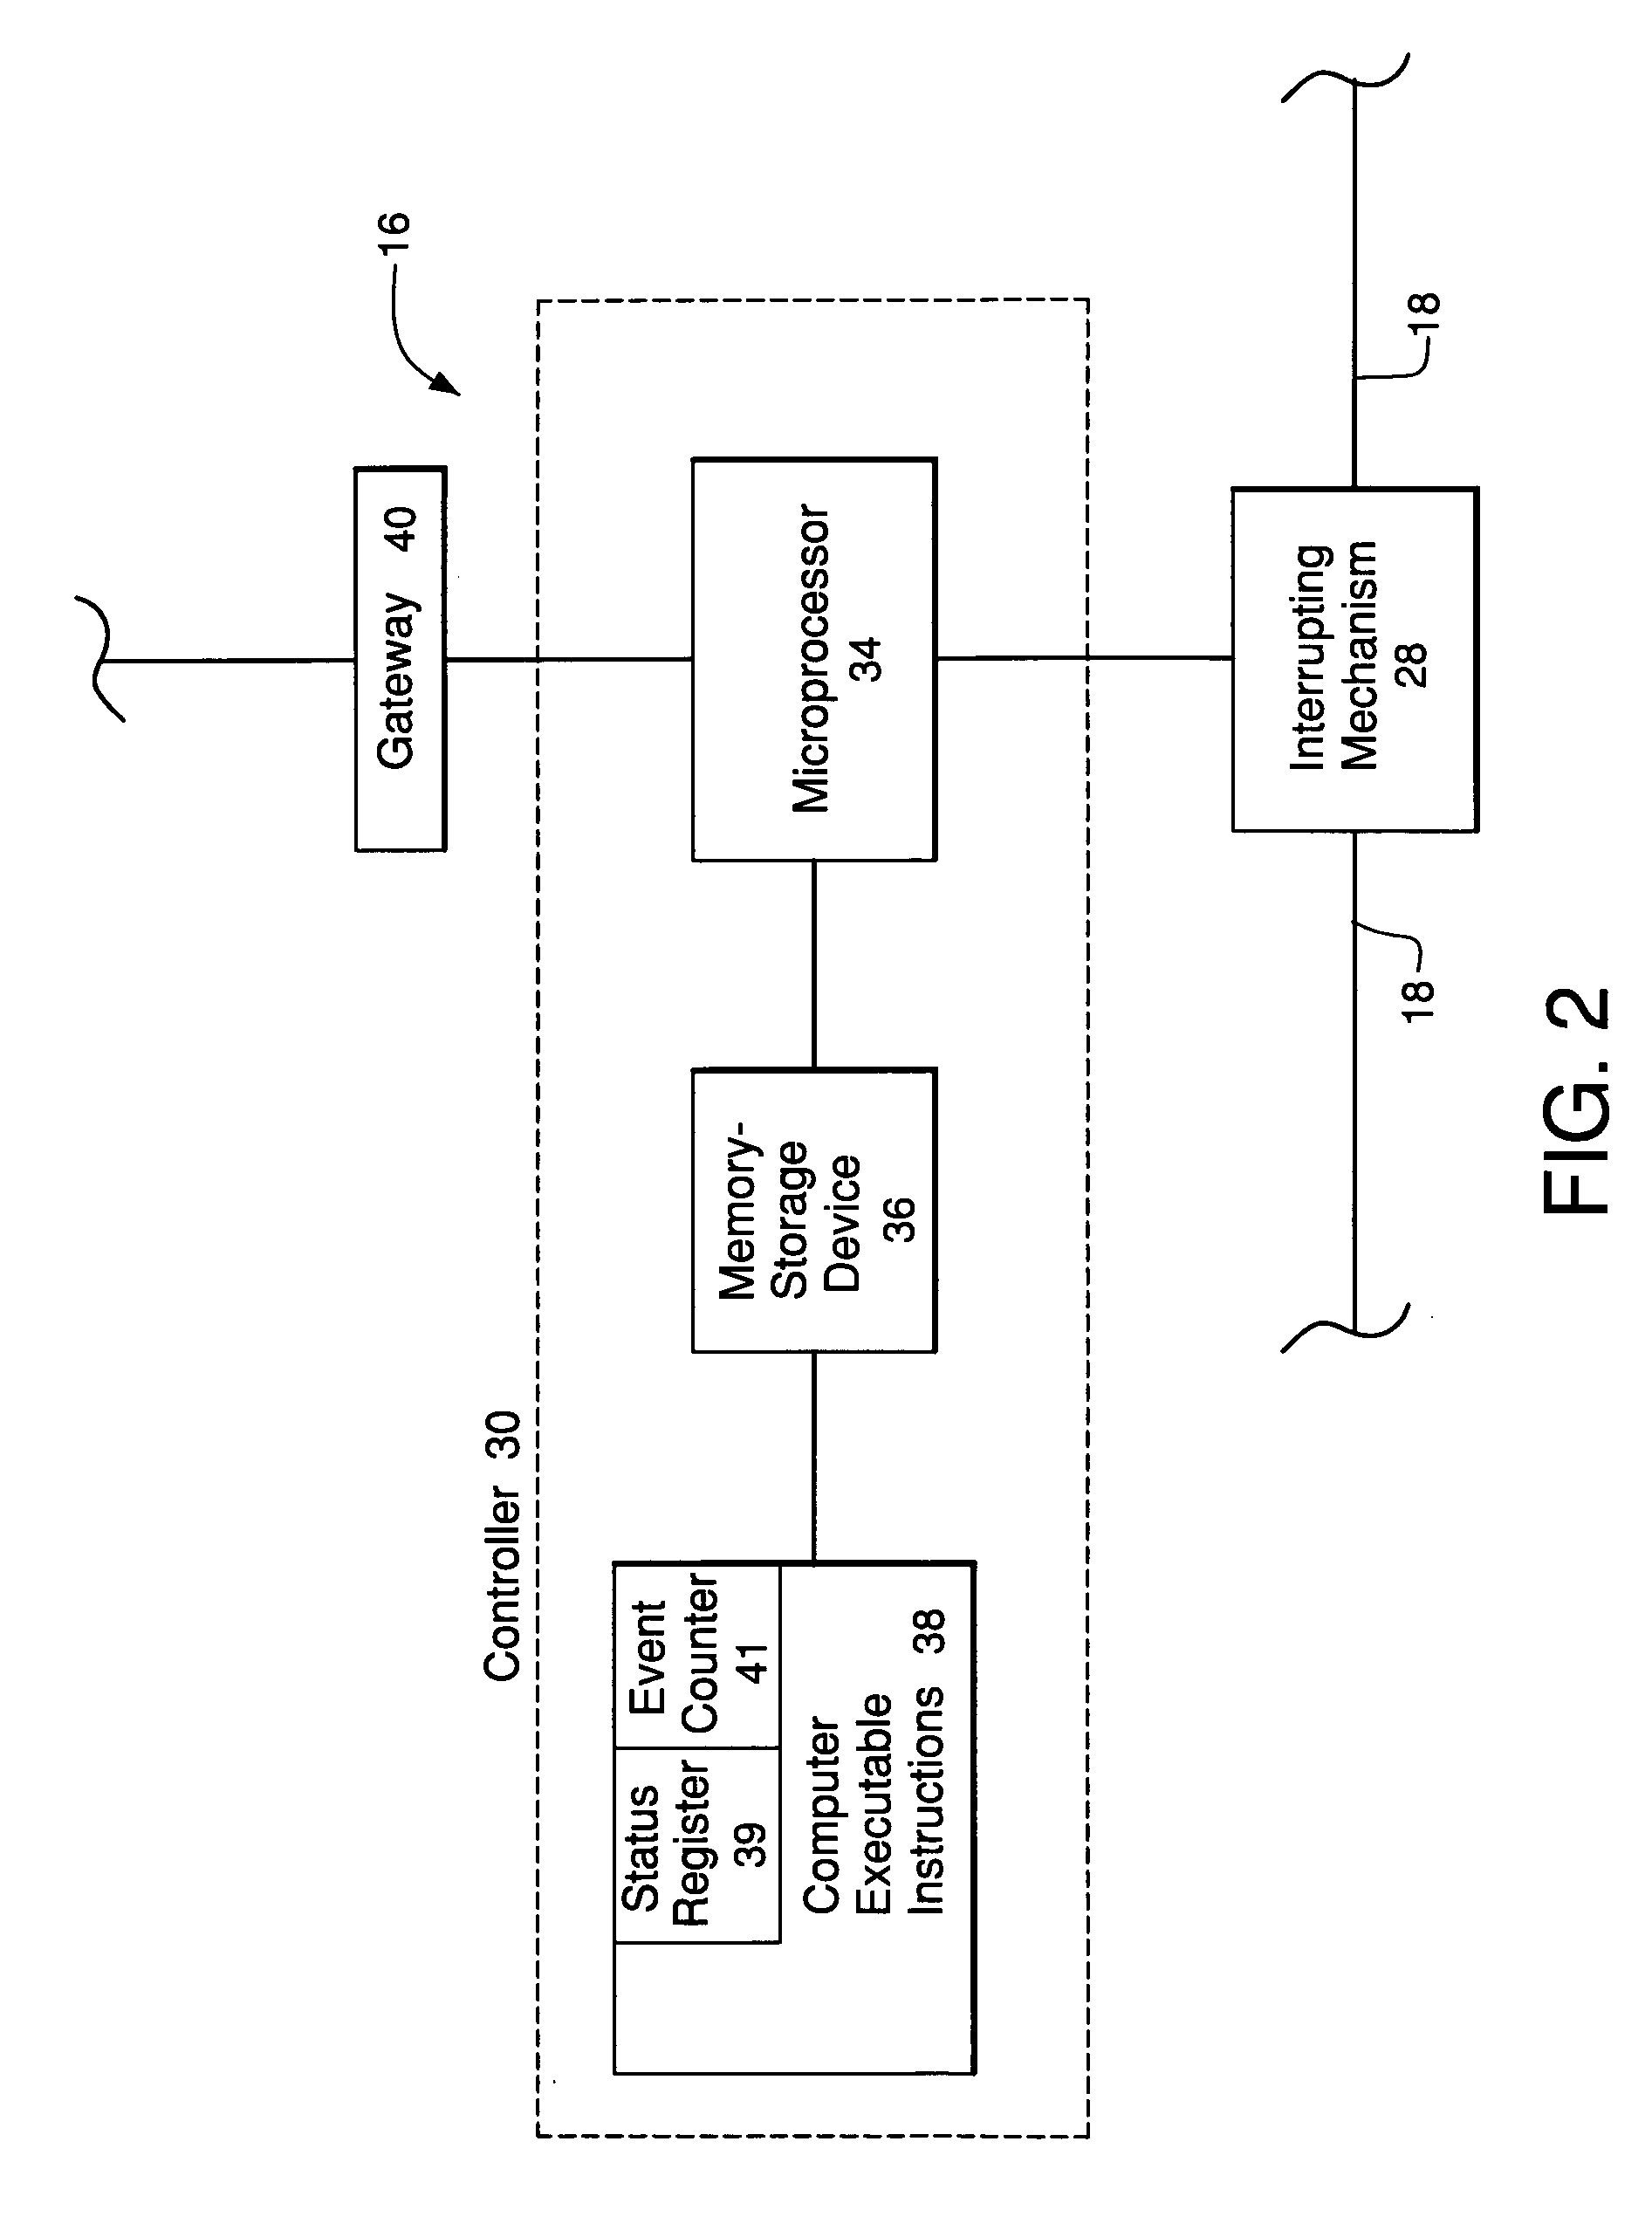 Adaptive protection system for a power-distribution network